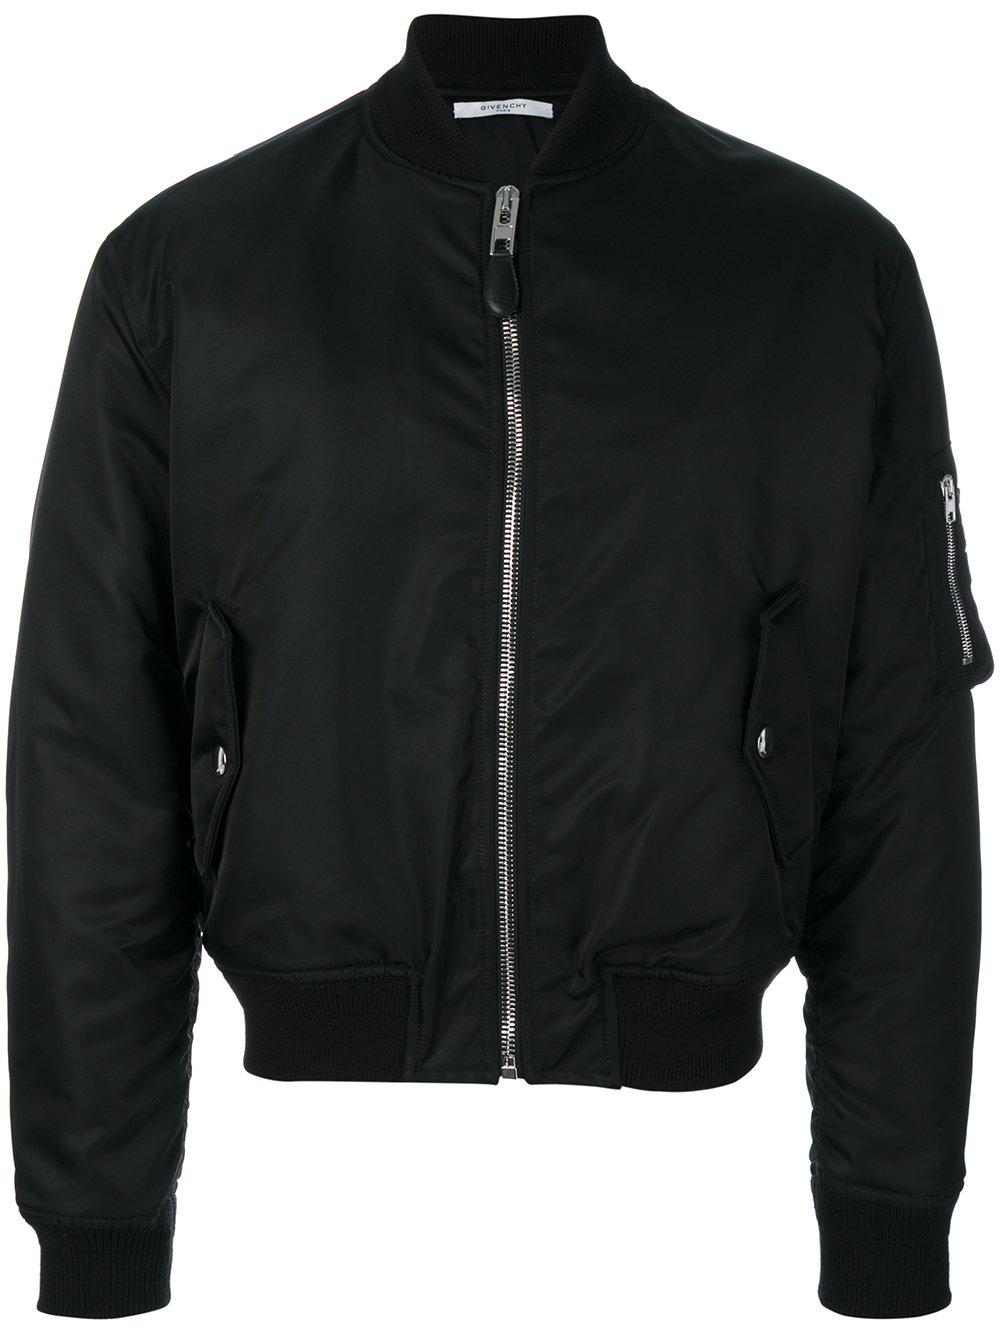 Givenchy Illuminati Patch Bomber Jacket in Black for Men | Lyst